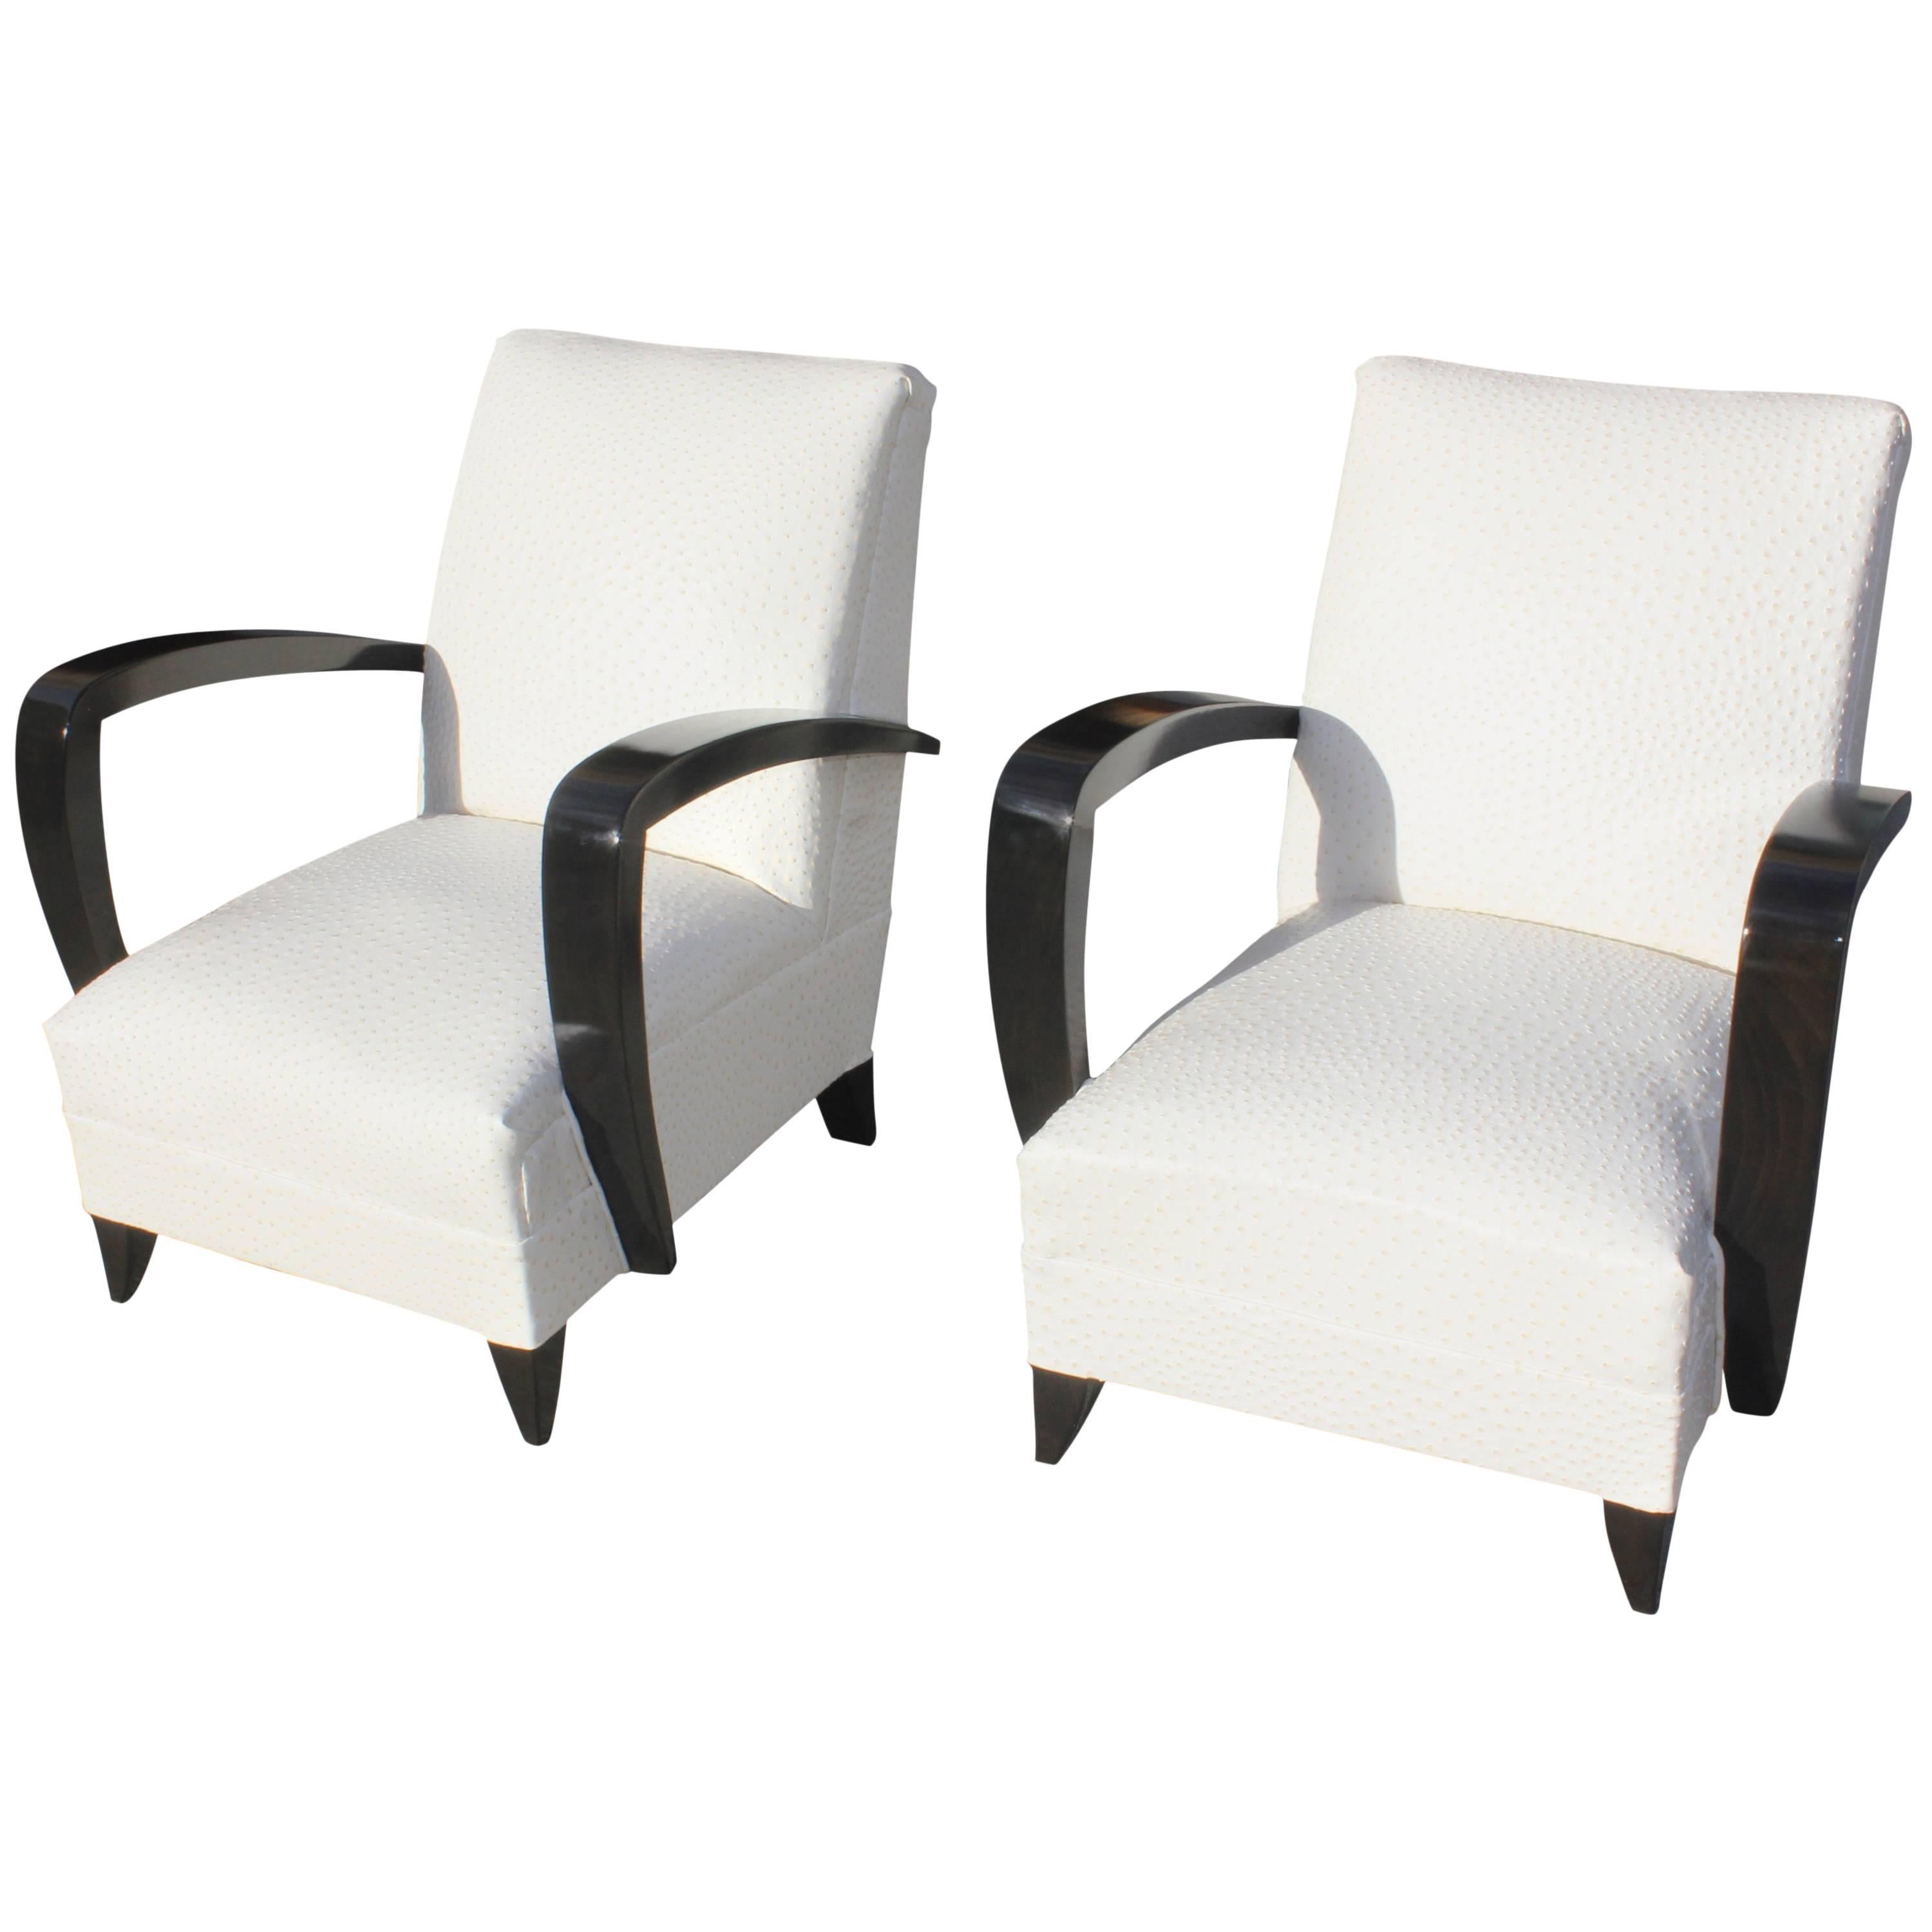 Elegant Pair of French Art Deco Armchairs or Club Chairs Attributed to Rene Prou